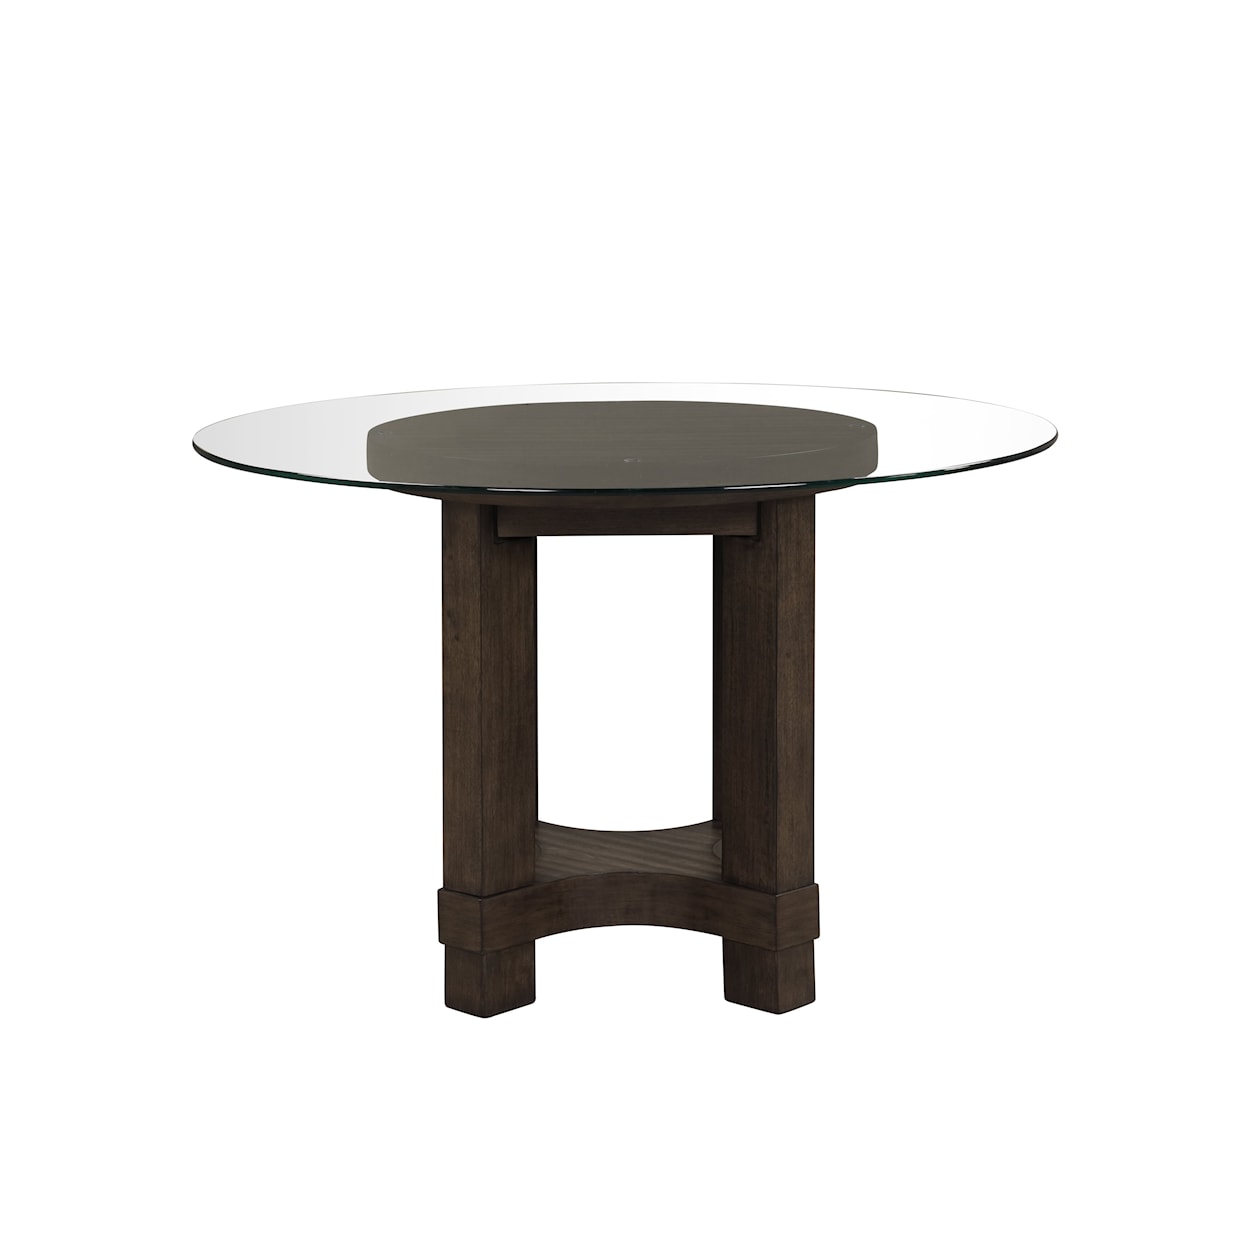 New Classic Furniture Cityscape Dining Table